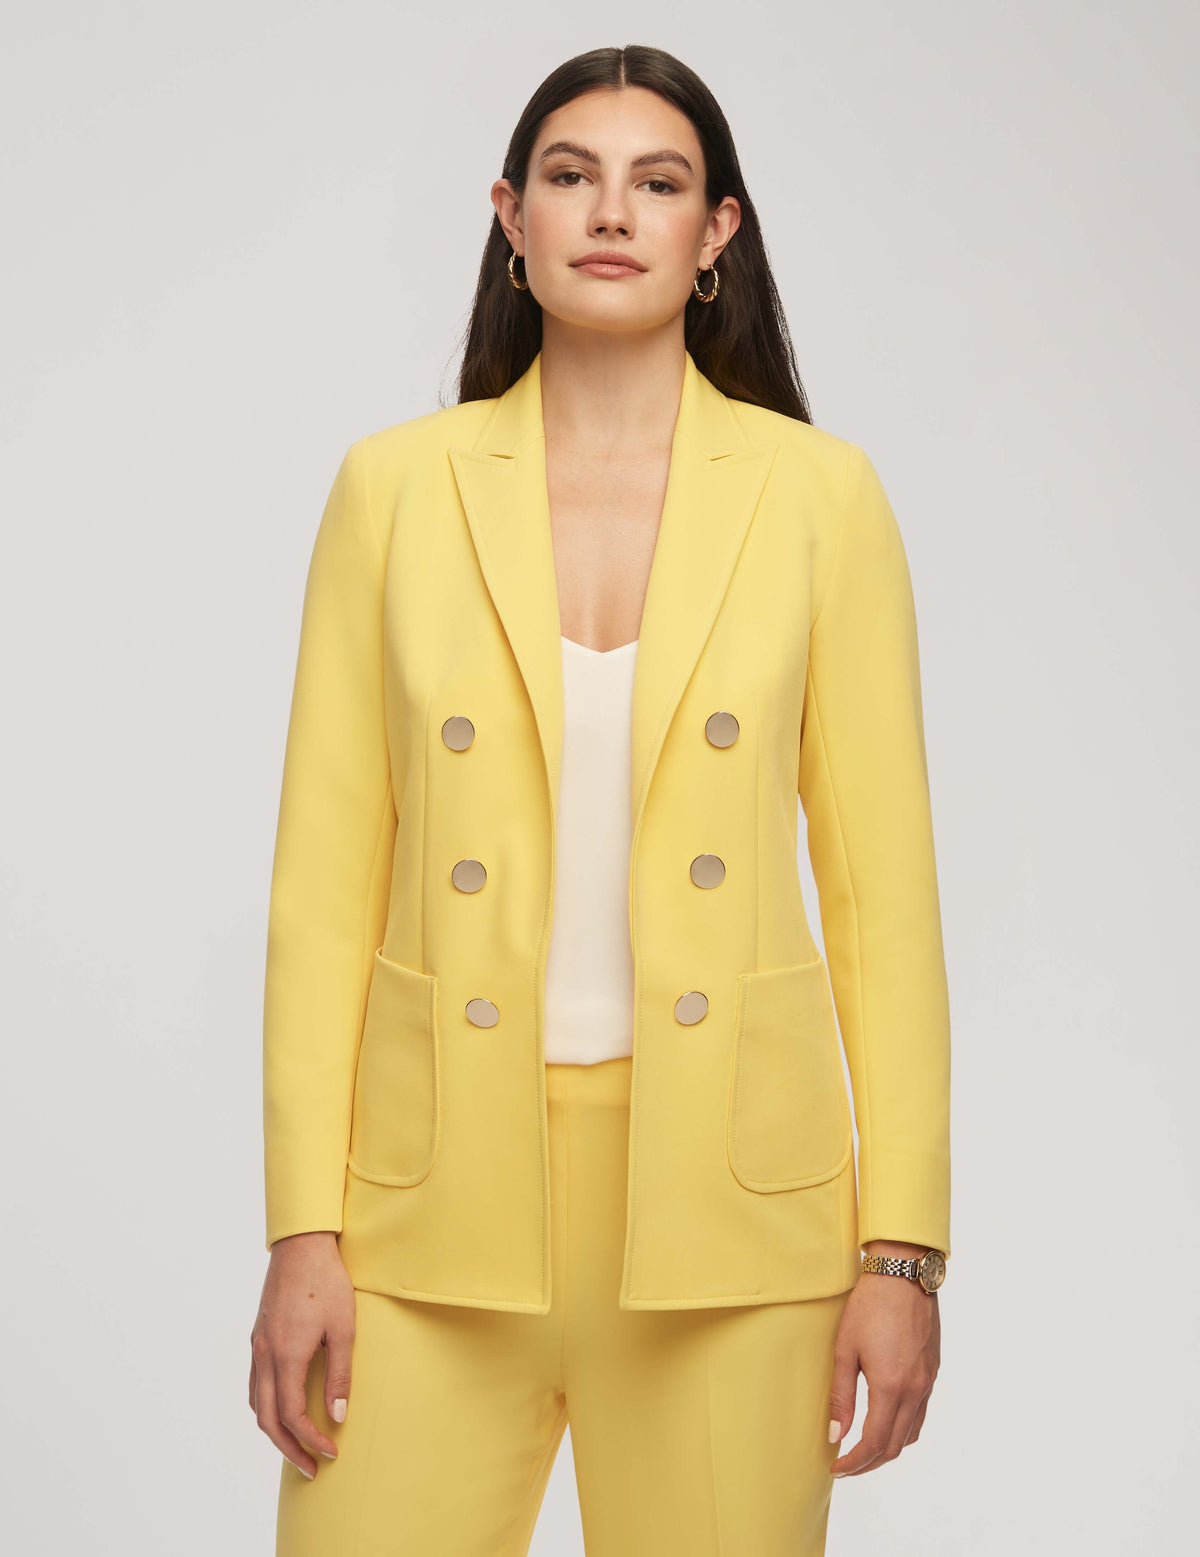 Anne Klein Bright Daffodil Faux Double-Breasted Jacket With Patch Pockets- Clearance